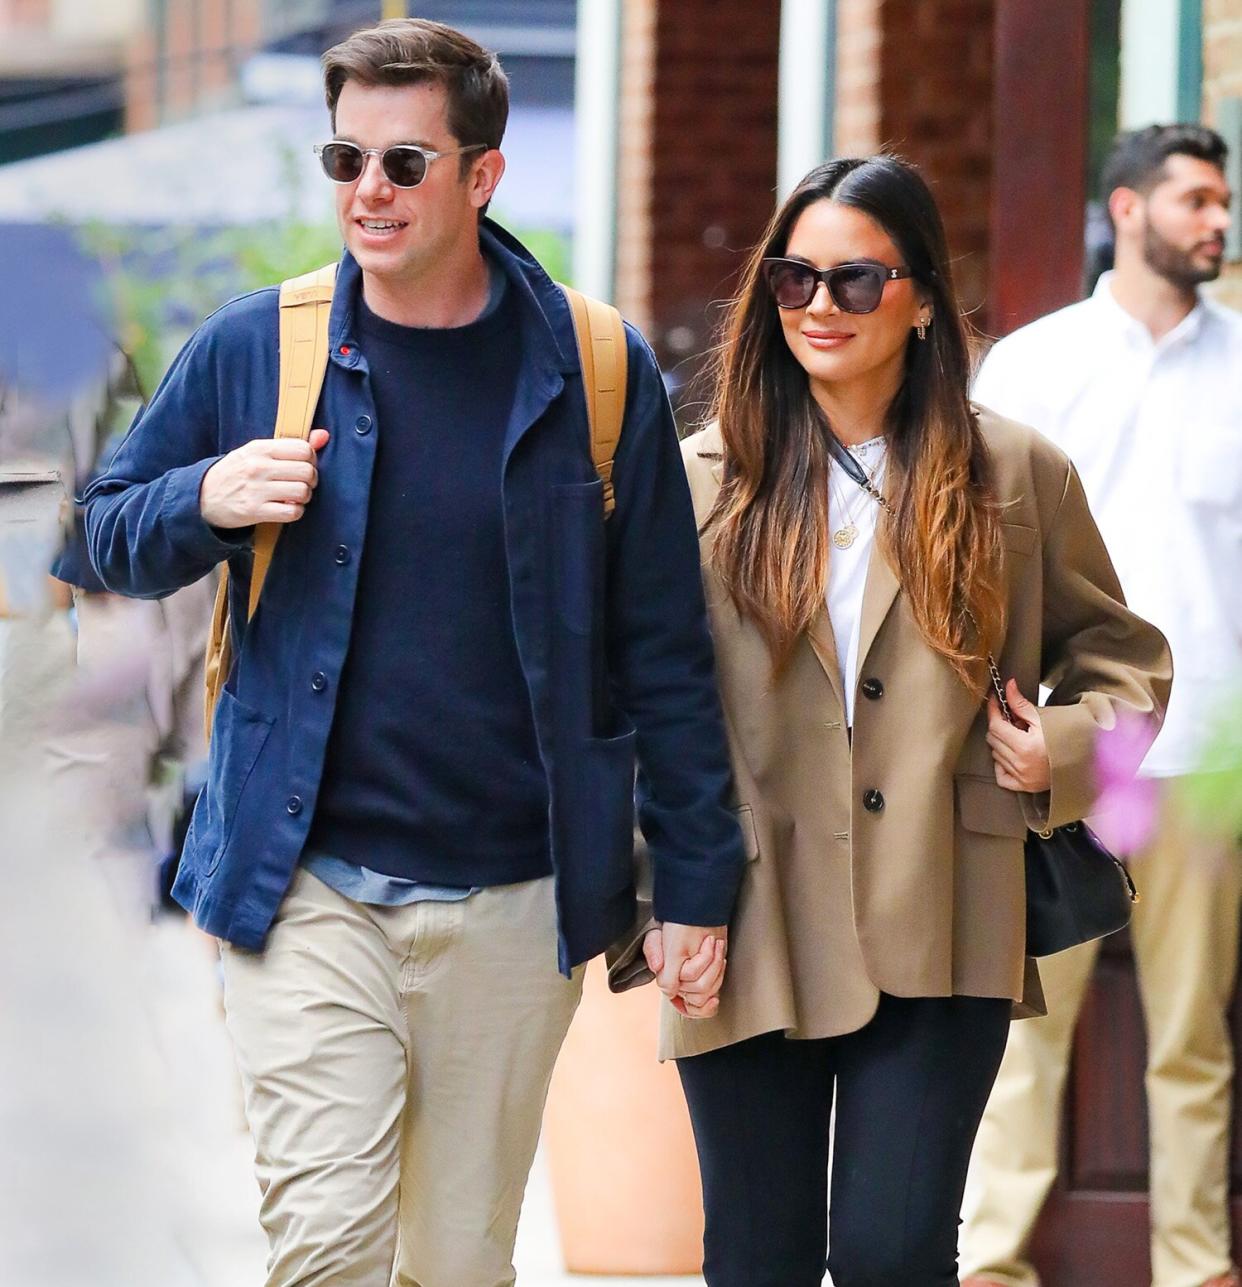 Olivia Munn and John Mulaney spotted hand in hand as they were heading to the Madison Square Garden where John is performing in New York City